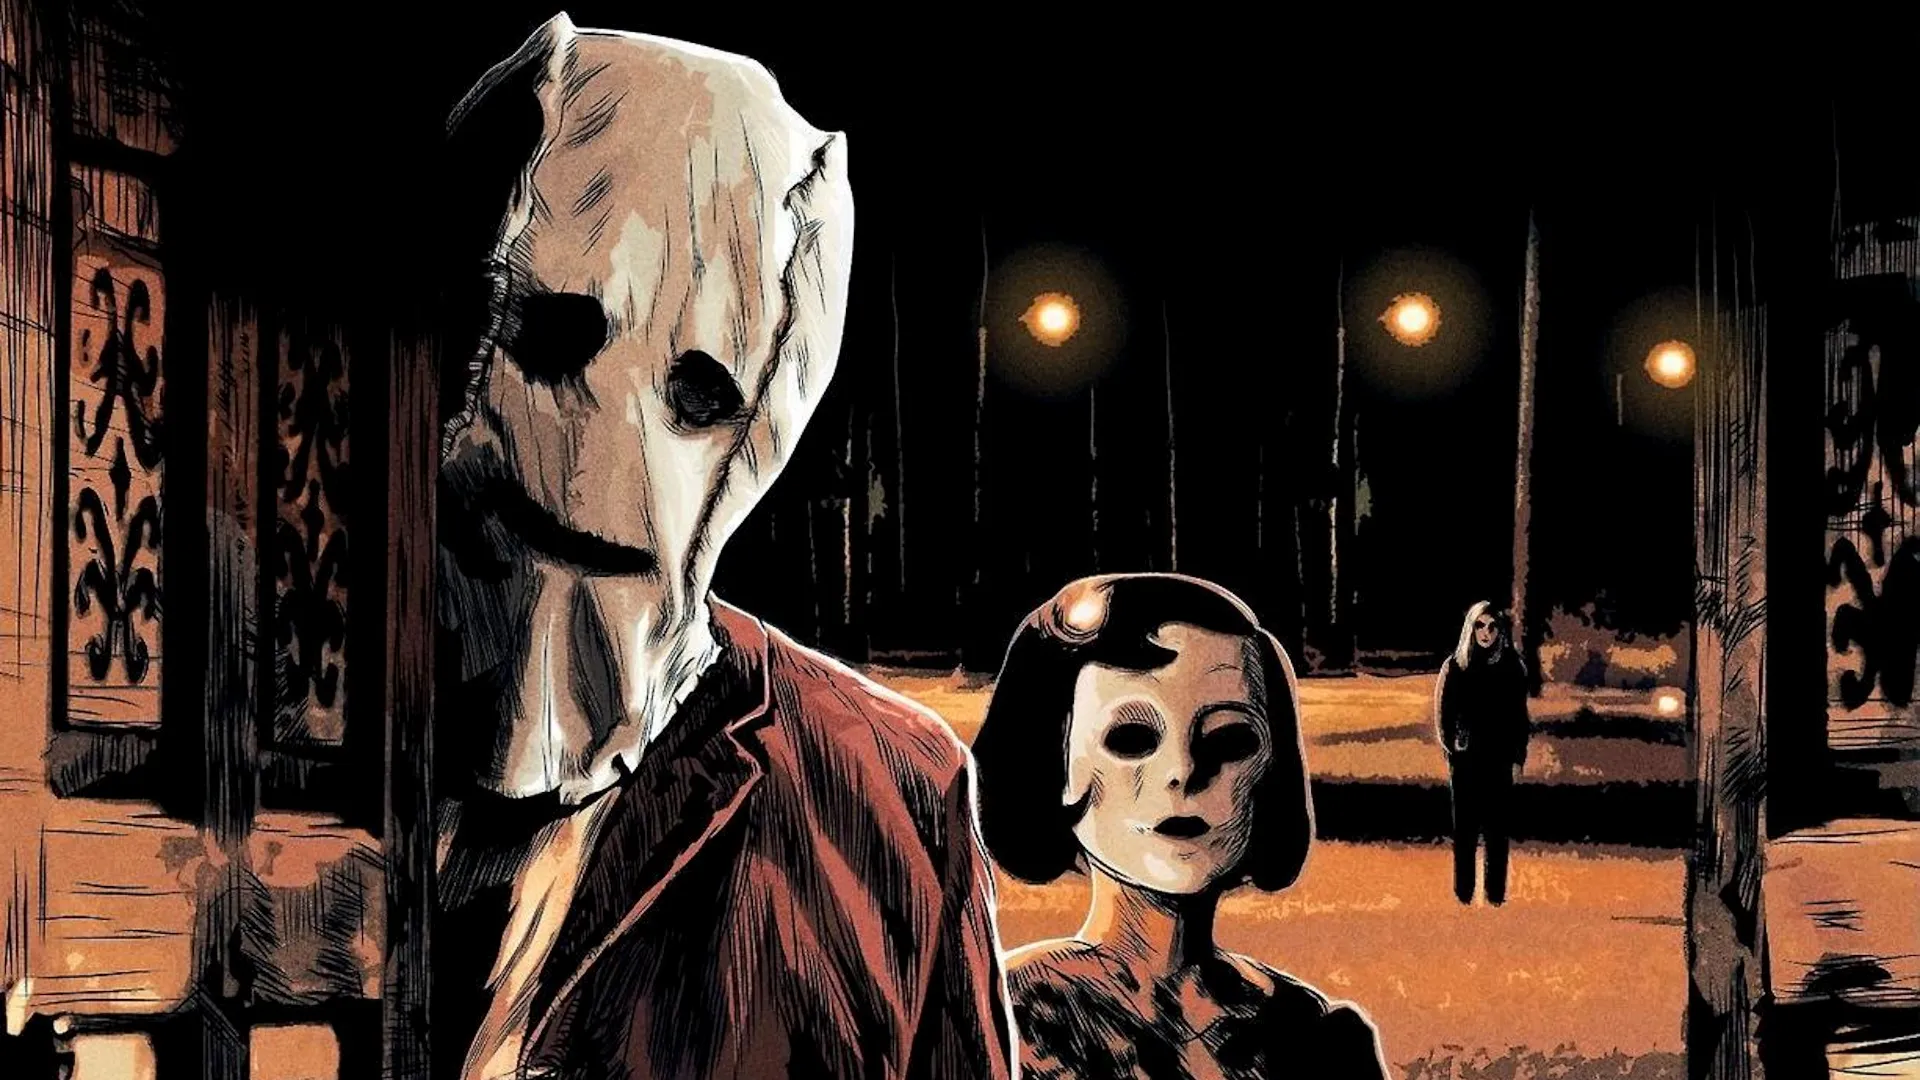 The Strangers background